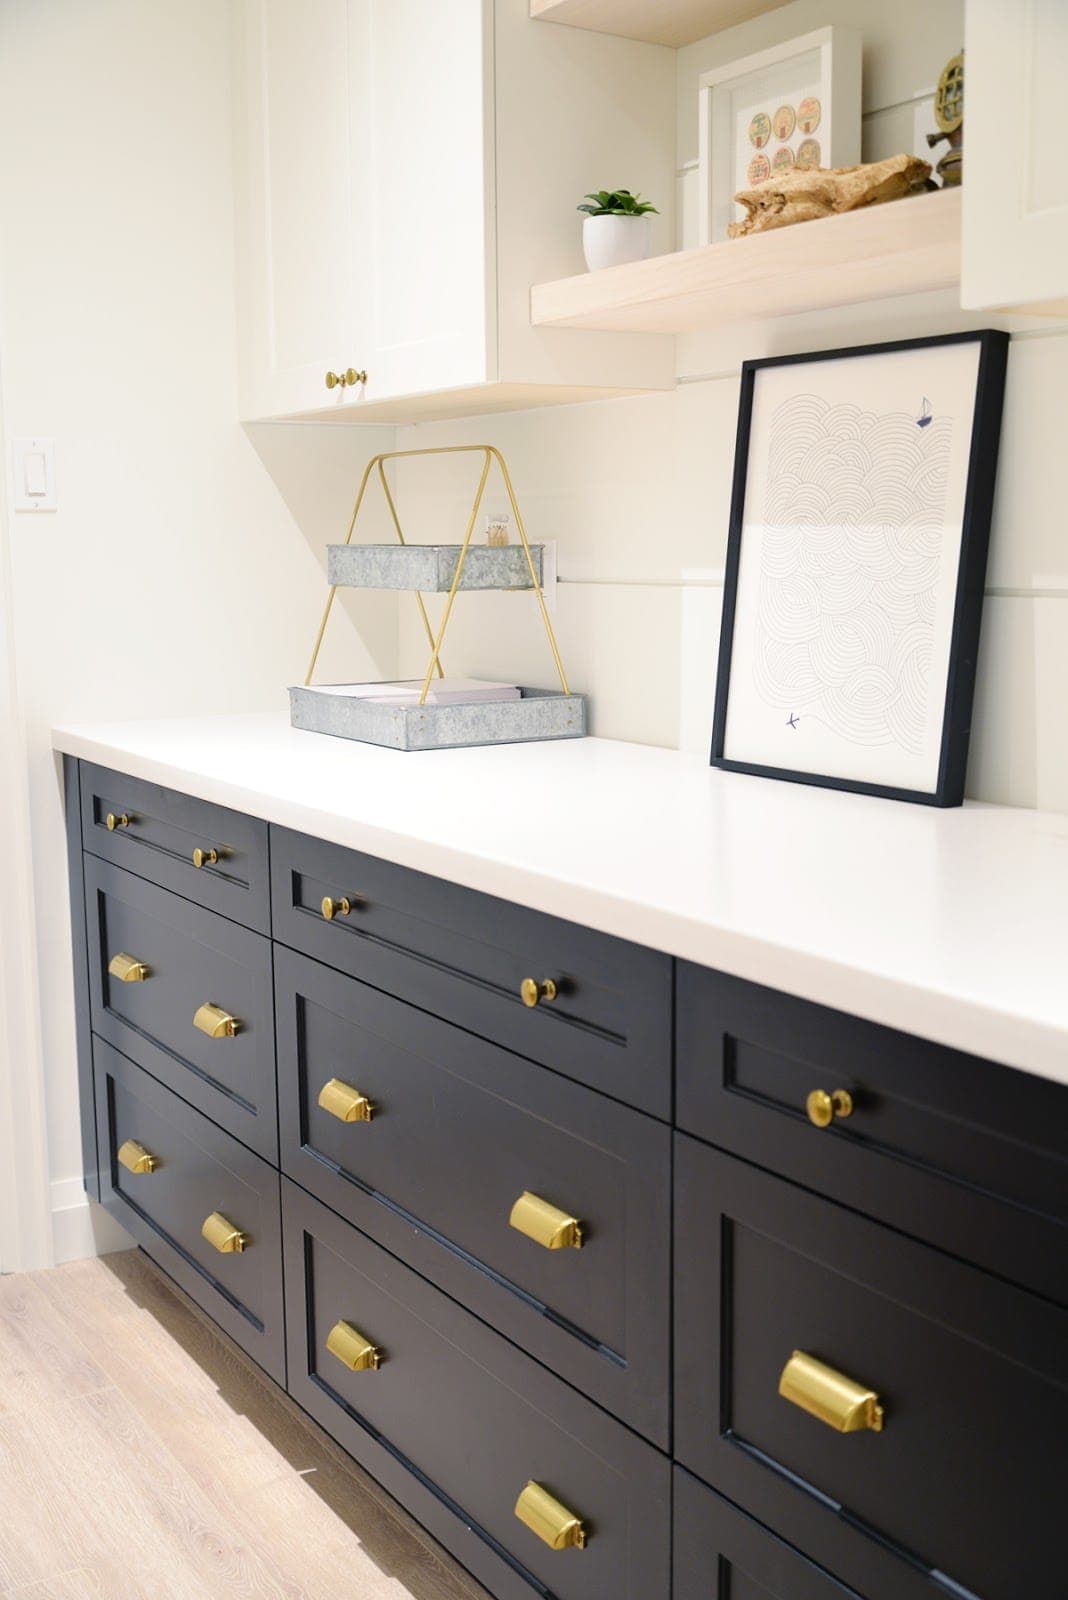 Use drawers instead of cabinets to store craft items for optimal craft room storage and organization